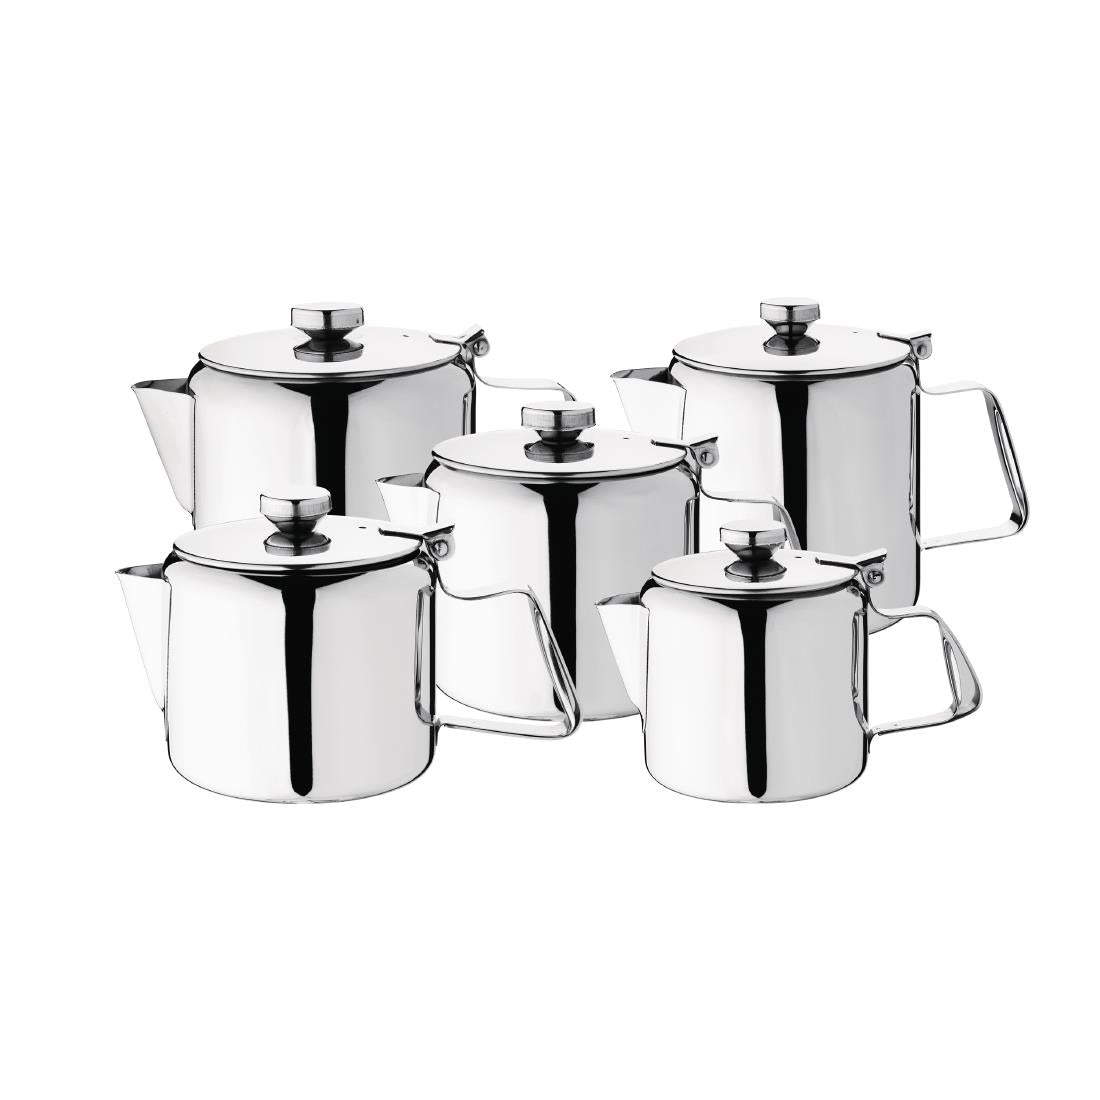 Olympia Concorde Stainless Steel Teapot 850ml